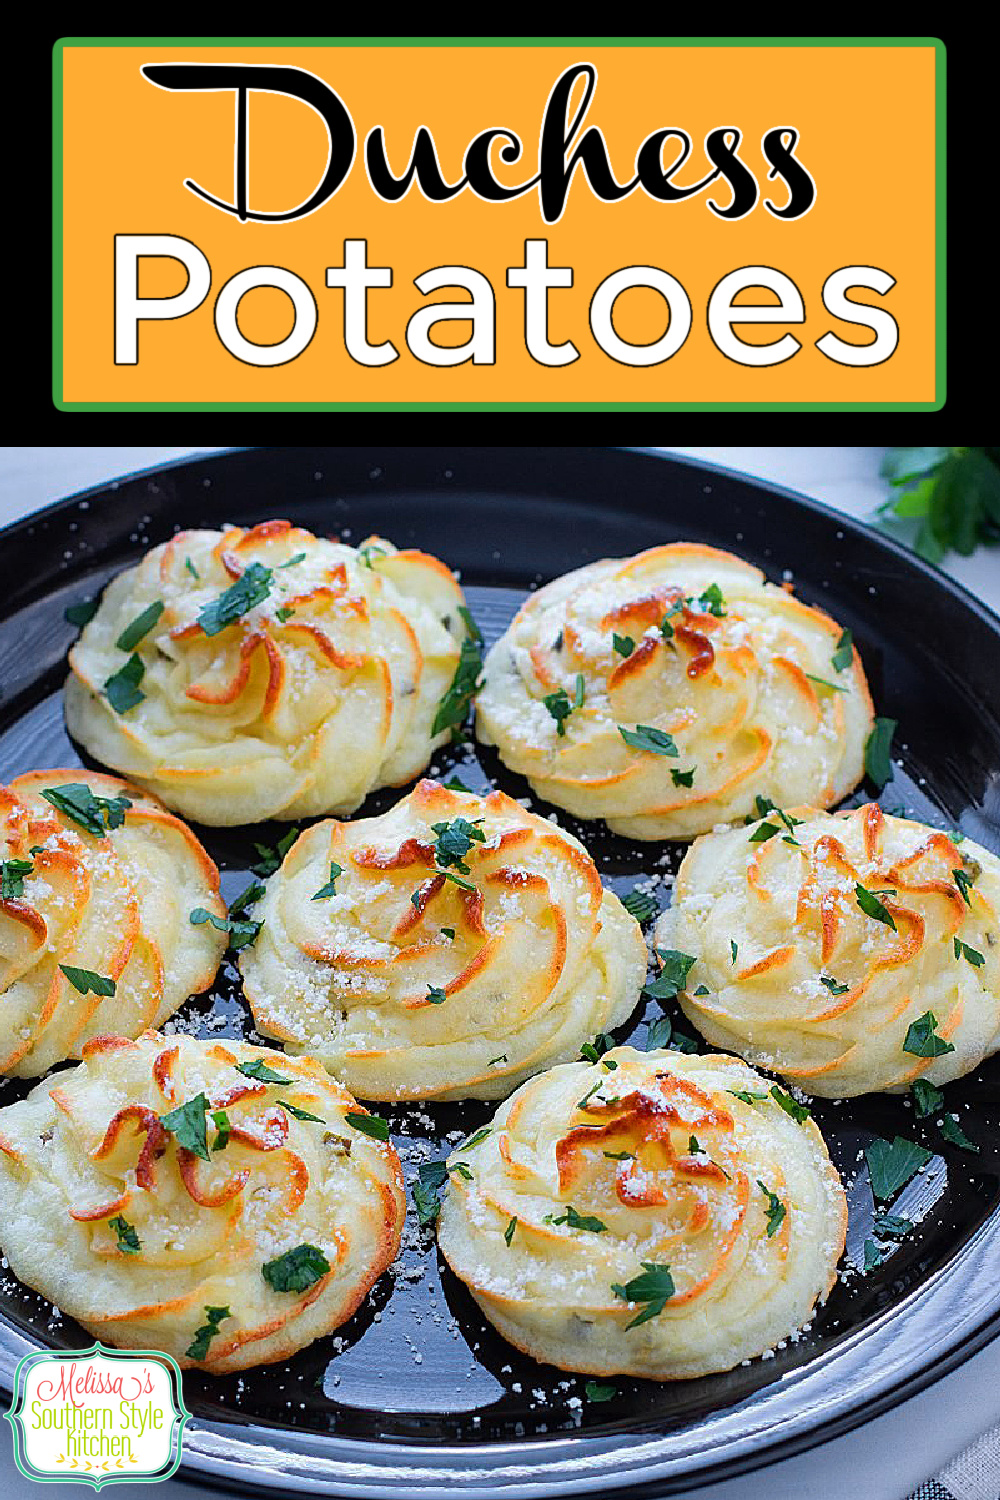 Swirls of Duchess Potatoes makes a beautiful and flavorful side dish that's ideal for the holidays and special family gatherings #duchesspotatoes #mashedpotatoes #potatorecipes #easypotatoes #holidaysidedishrecipes #easypotatoes #christmassidedishes #thanksgivingsidedishes #southernstyle via @melissasssk